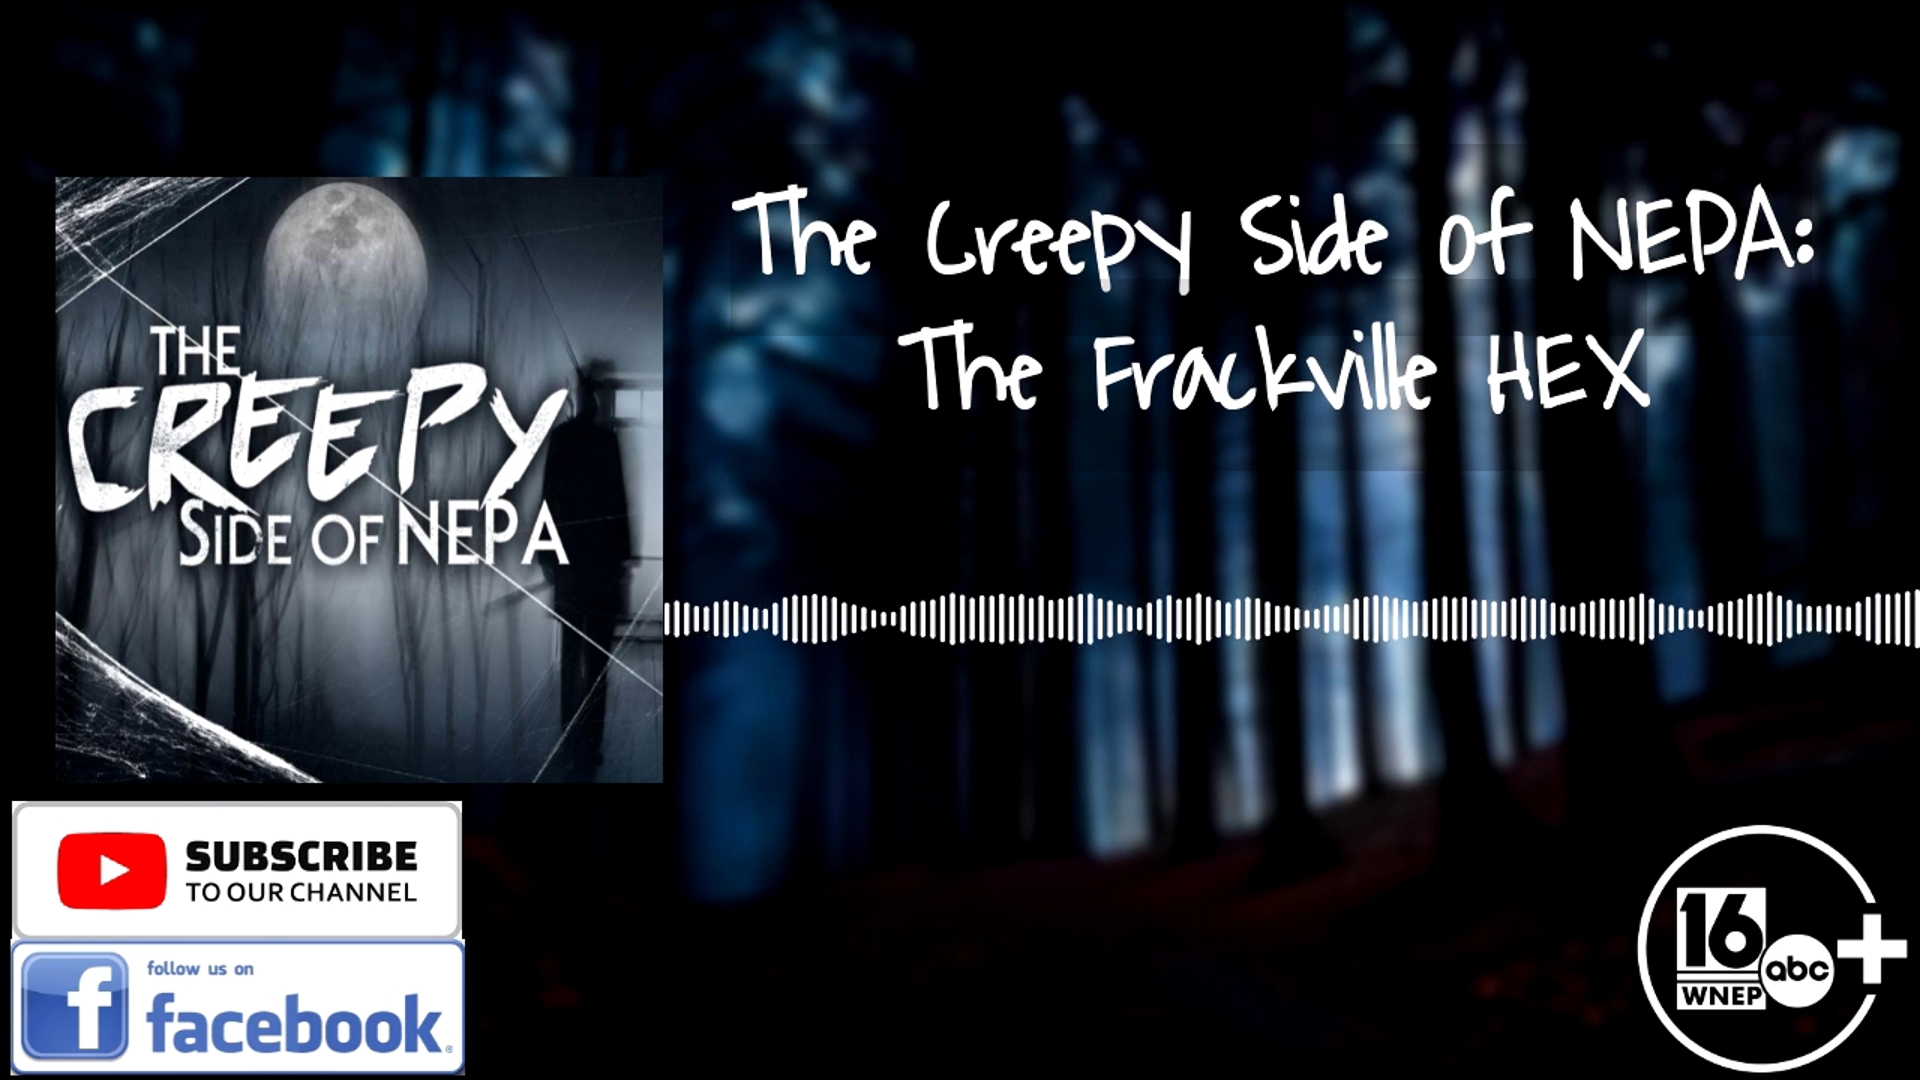 Have you heard about the Hex of Frackville PA? Join us as we uncover the spooky legends and ghostly encounters in this episode of The Creepy Side of NEPA.